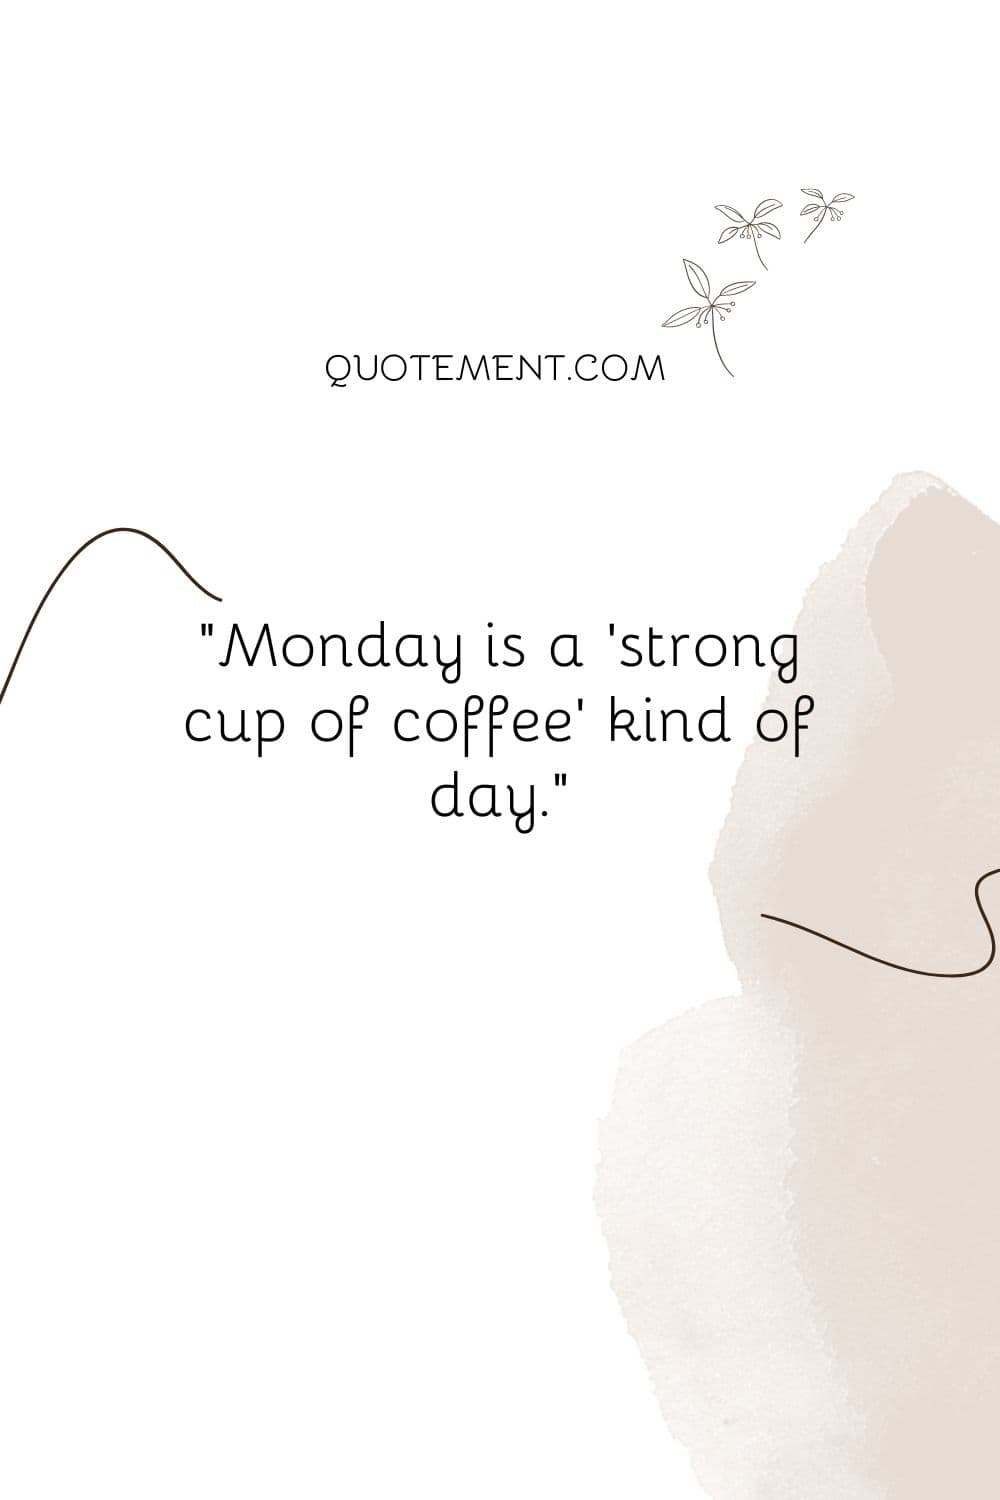 Monday is a 'strong cup of coffee' kind of day